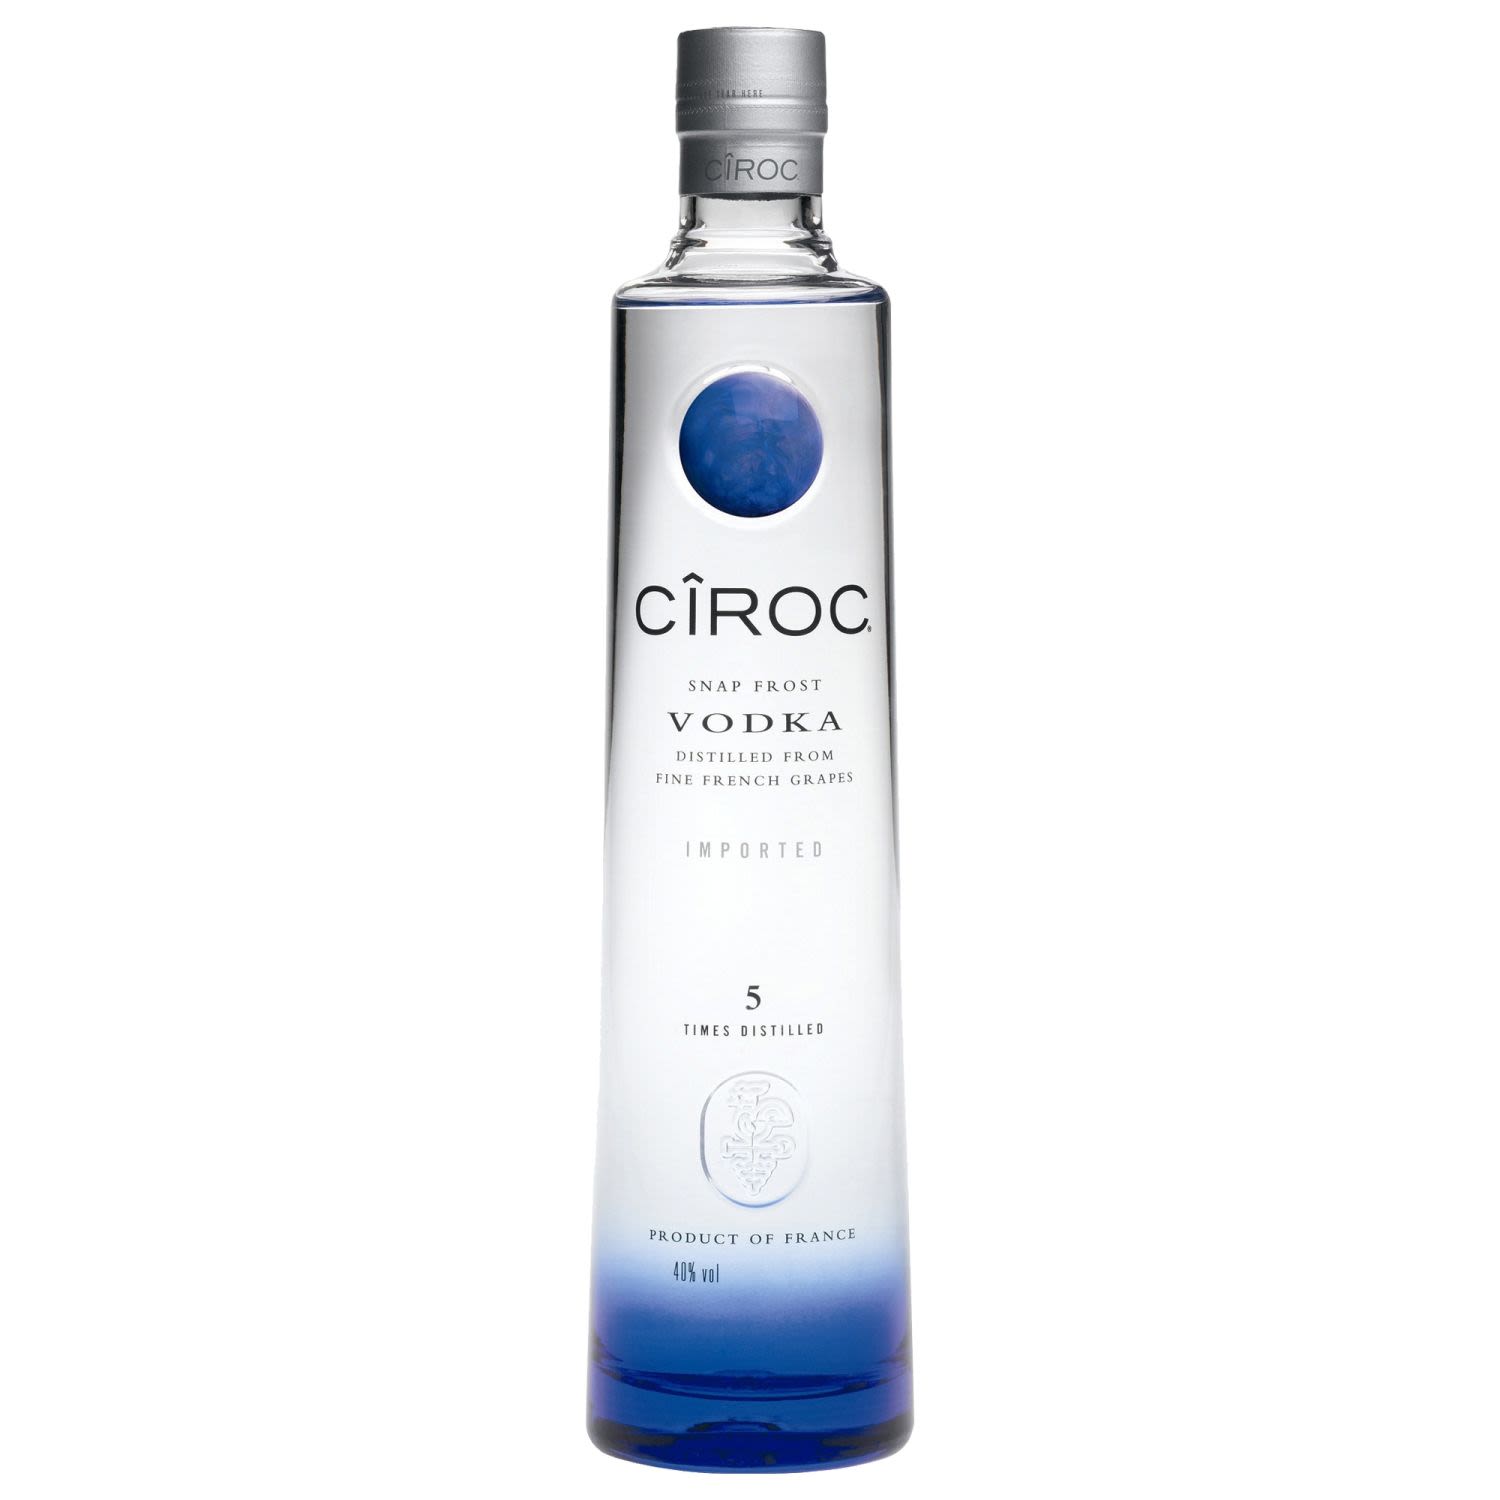 CÎROC vodka is distilled from fine French grapes. A true innovation in French craftsmanship, CÎROC vodka is distilled five times, finished in a tailor-made copper pot still in Southern France. CÎROC vodka offers a taste experience that is lusciously different and elegantly smooth.<br /> <br />Alcohol Volume: 40.00%<br /><br />Pack Format: Bottle<br /><br />Standard Drinks: 24</br /><br />Pack Type: Bottle<br /><br />Country of Origin: France<br />